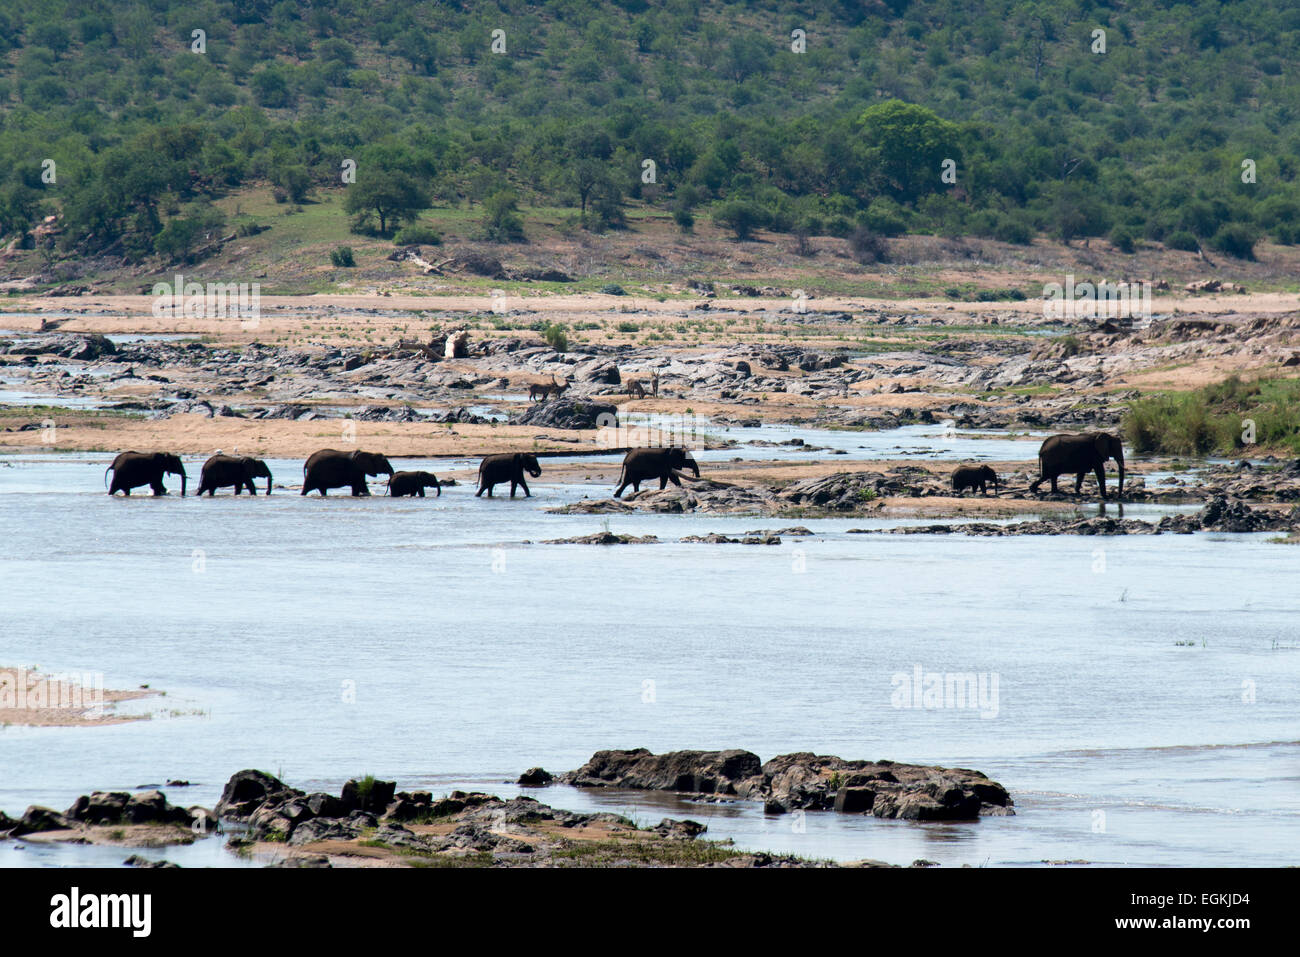 Elephant herd (Loxodonta africana) at the river in Letaba area of Kruger National Park, South Africa Stock Photo